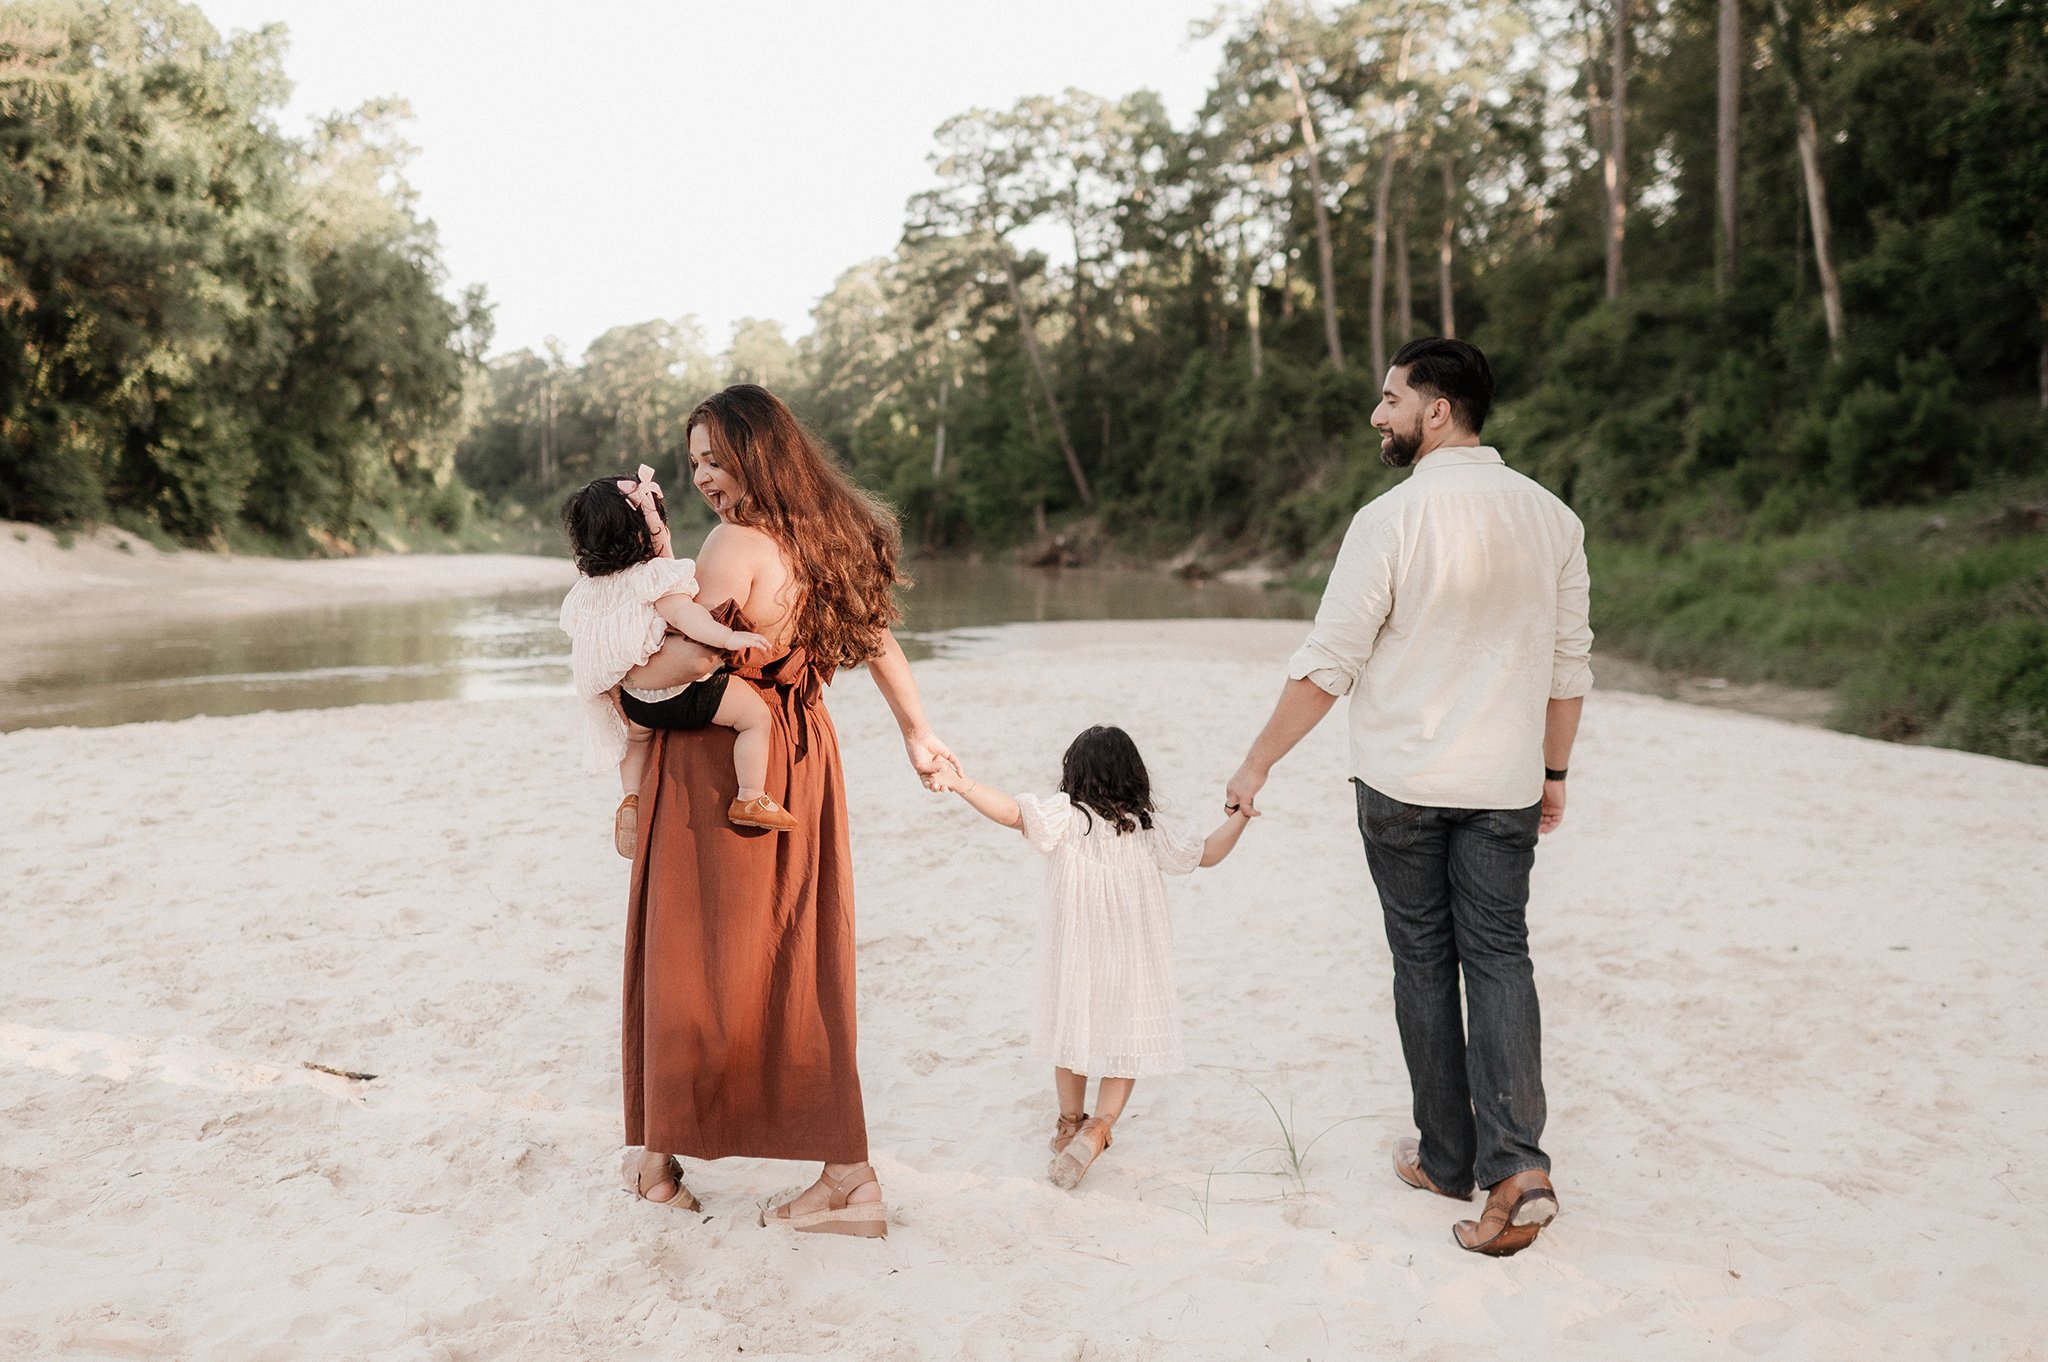 the woodlands family photographer _ conroe photographer _ houston family photographer _ ashley gillen photography _ texas family photographer _ conroe wedding photographer _ conroe texas _ cshi50.jpg